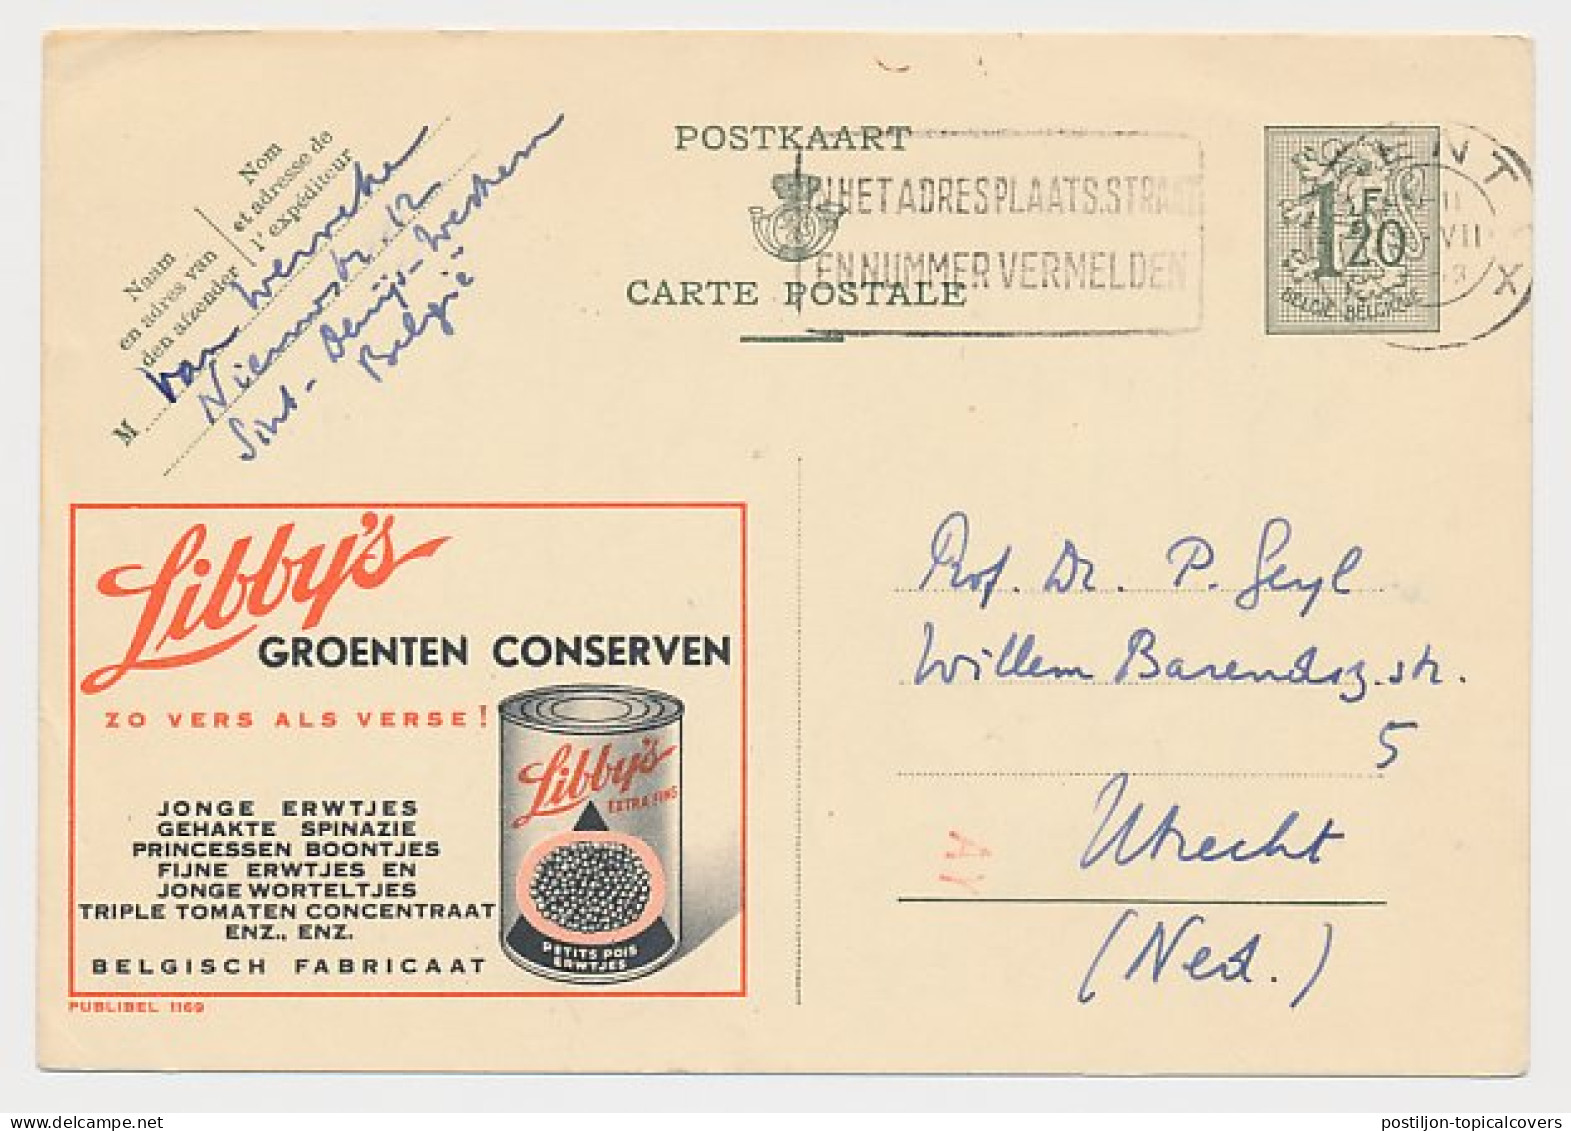 Publibel - Postal Stationery Belgium 1953 Canned Vegetables - Peas - Spinach - Beans - Carrots - Tomatoes  - Gemüse